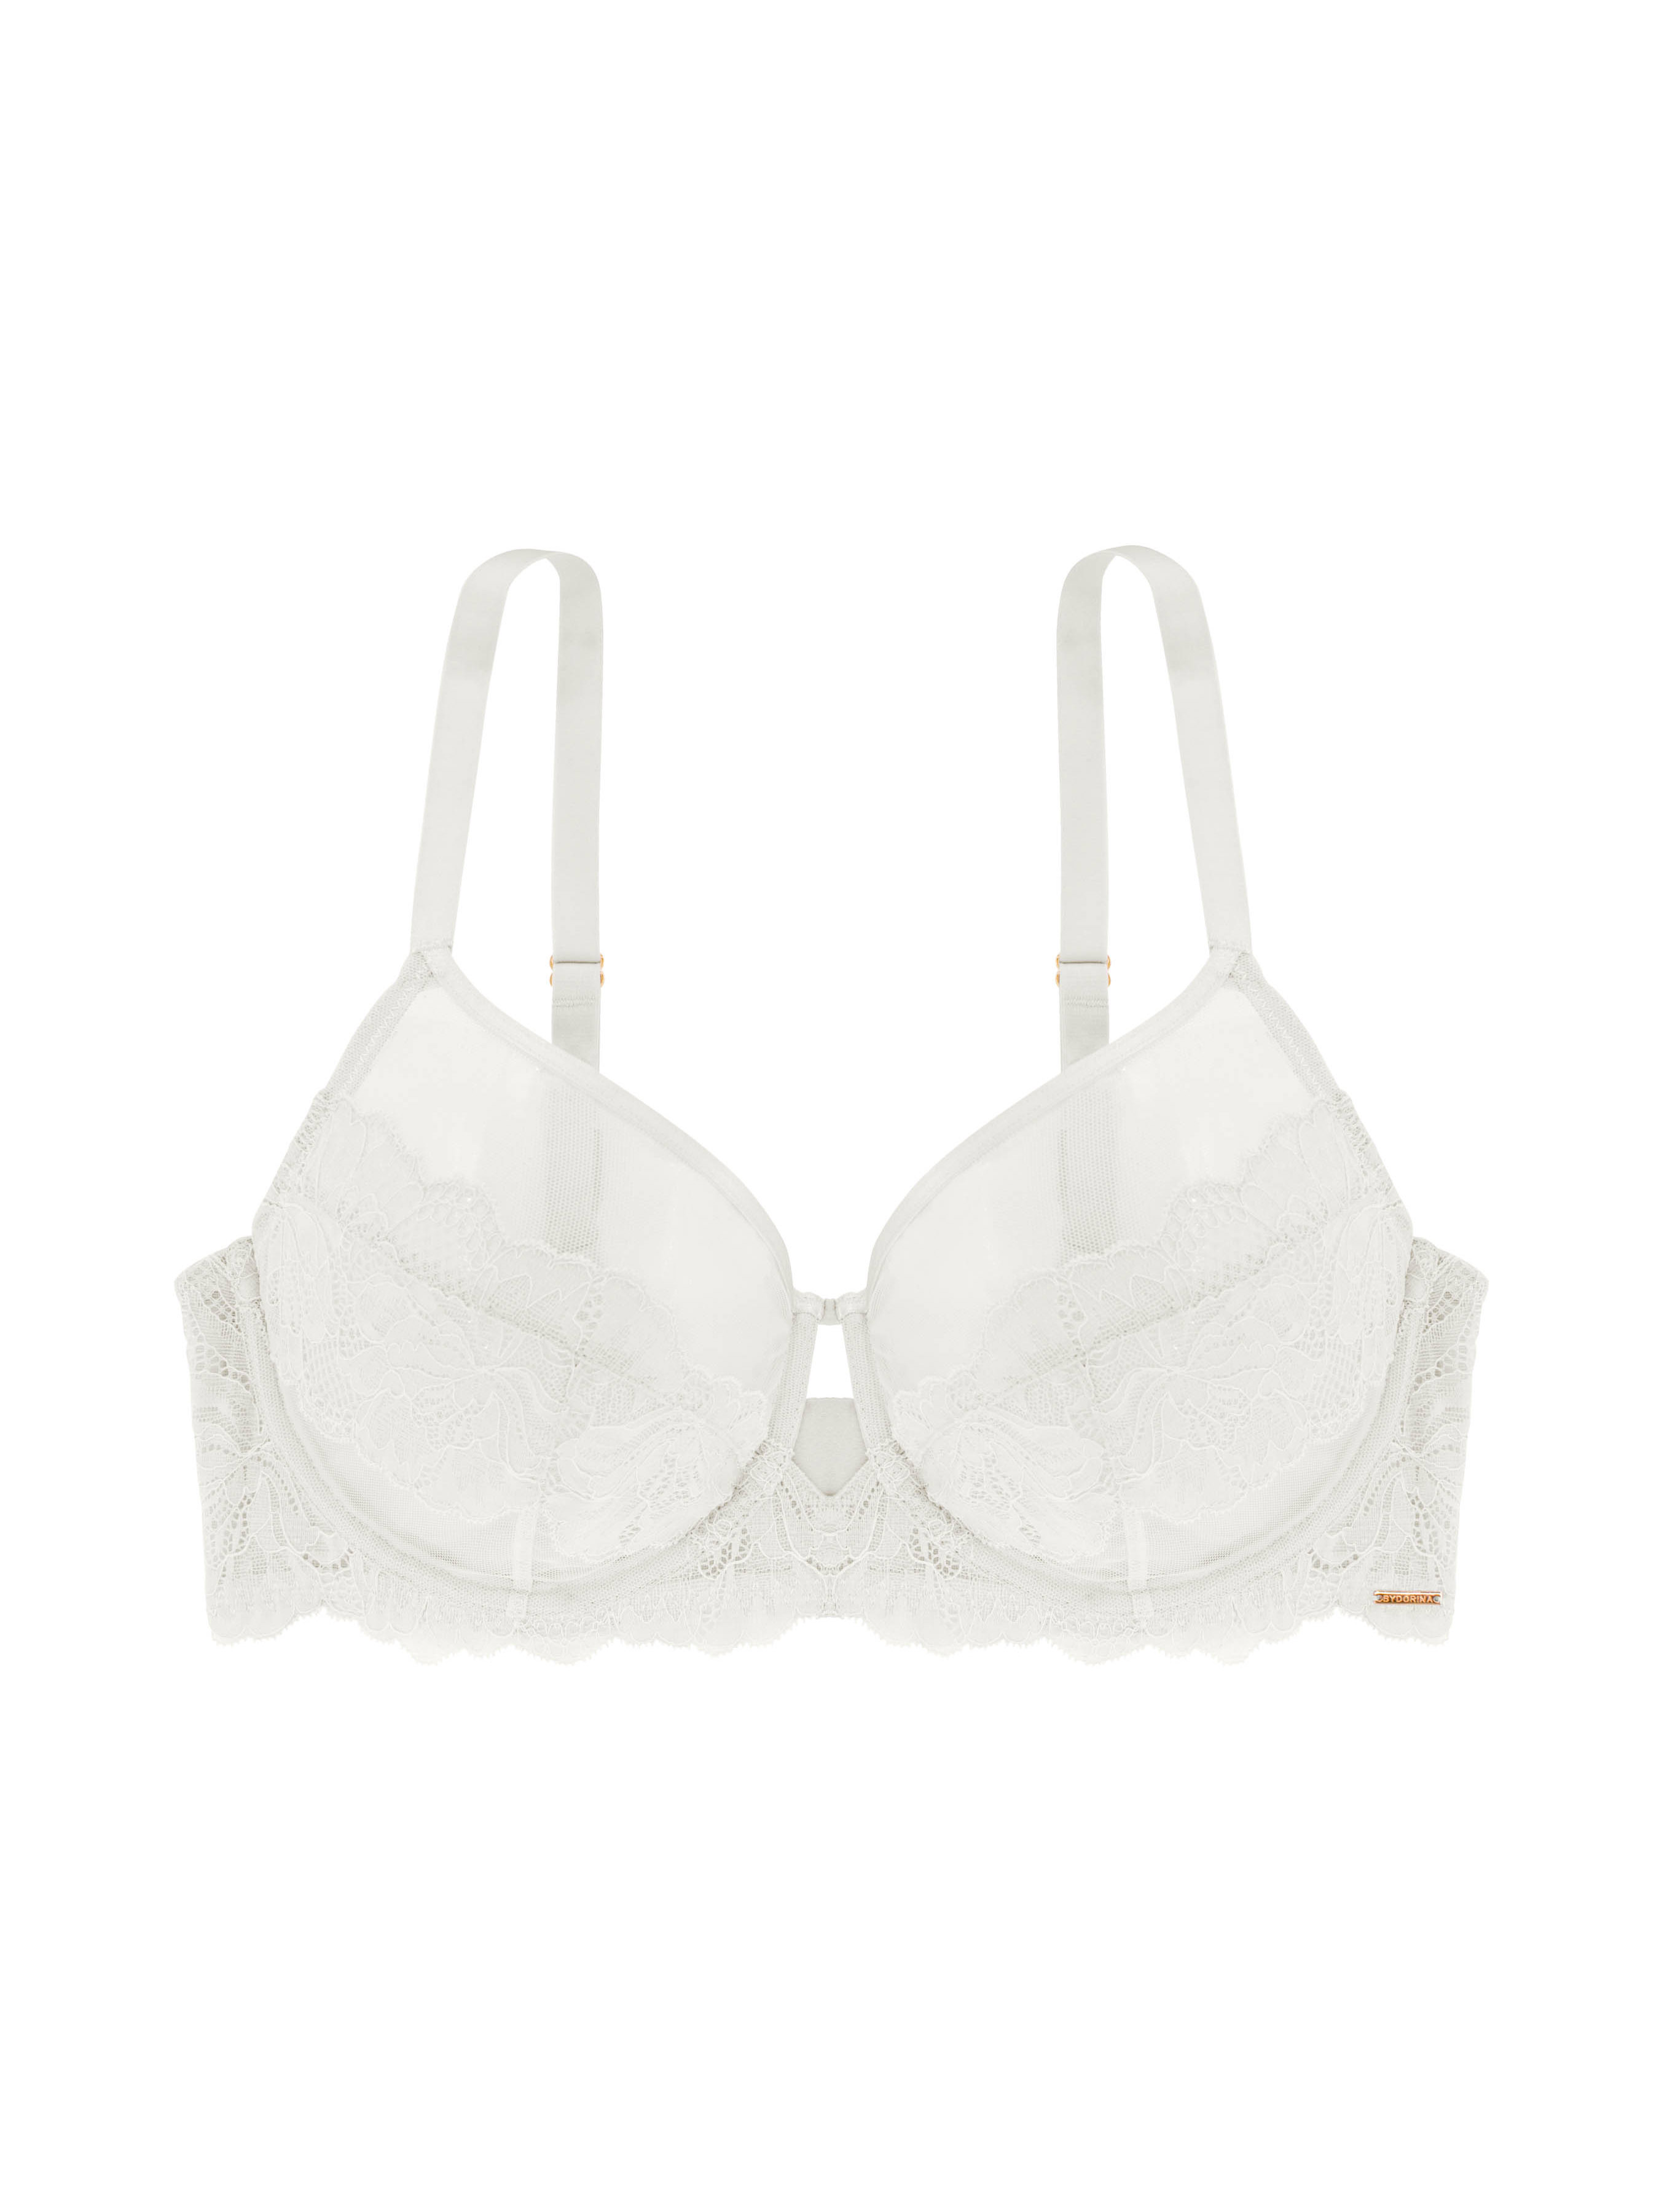 Buy Lady Lyka White Solid Non Wired Non Padded Everyday Bra LIBERTY 04 - Bra  for Women 13453132